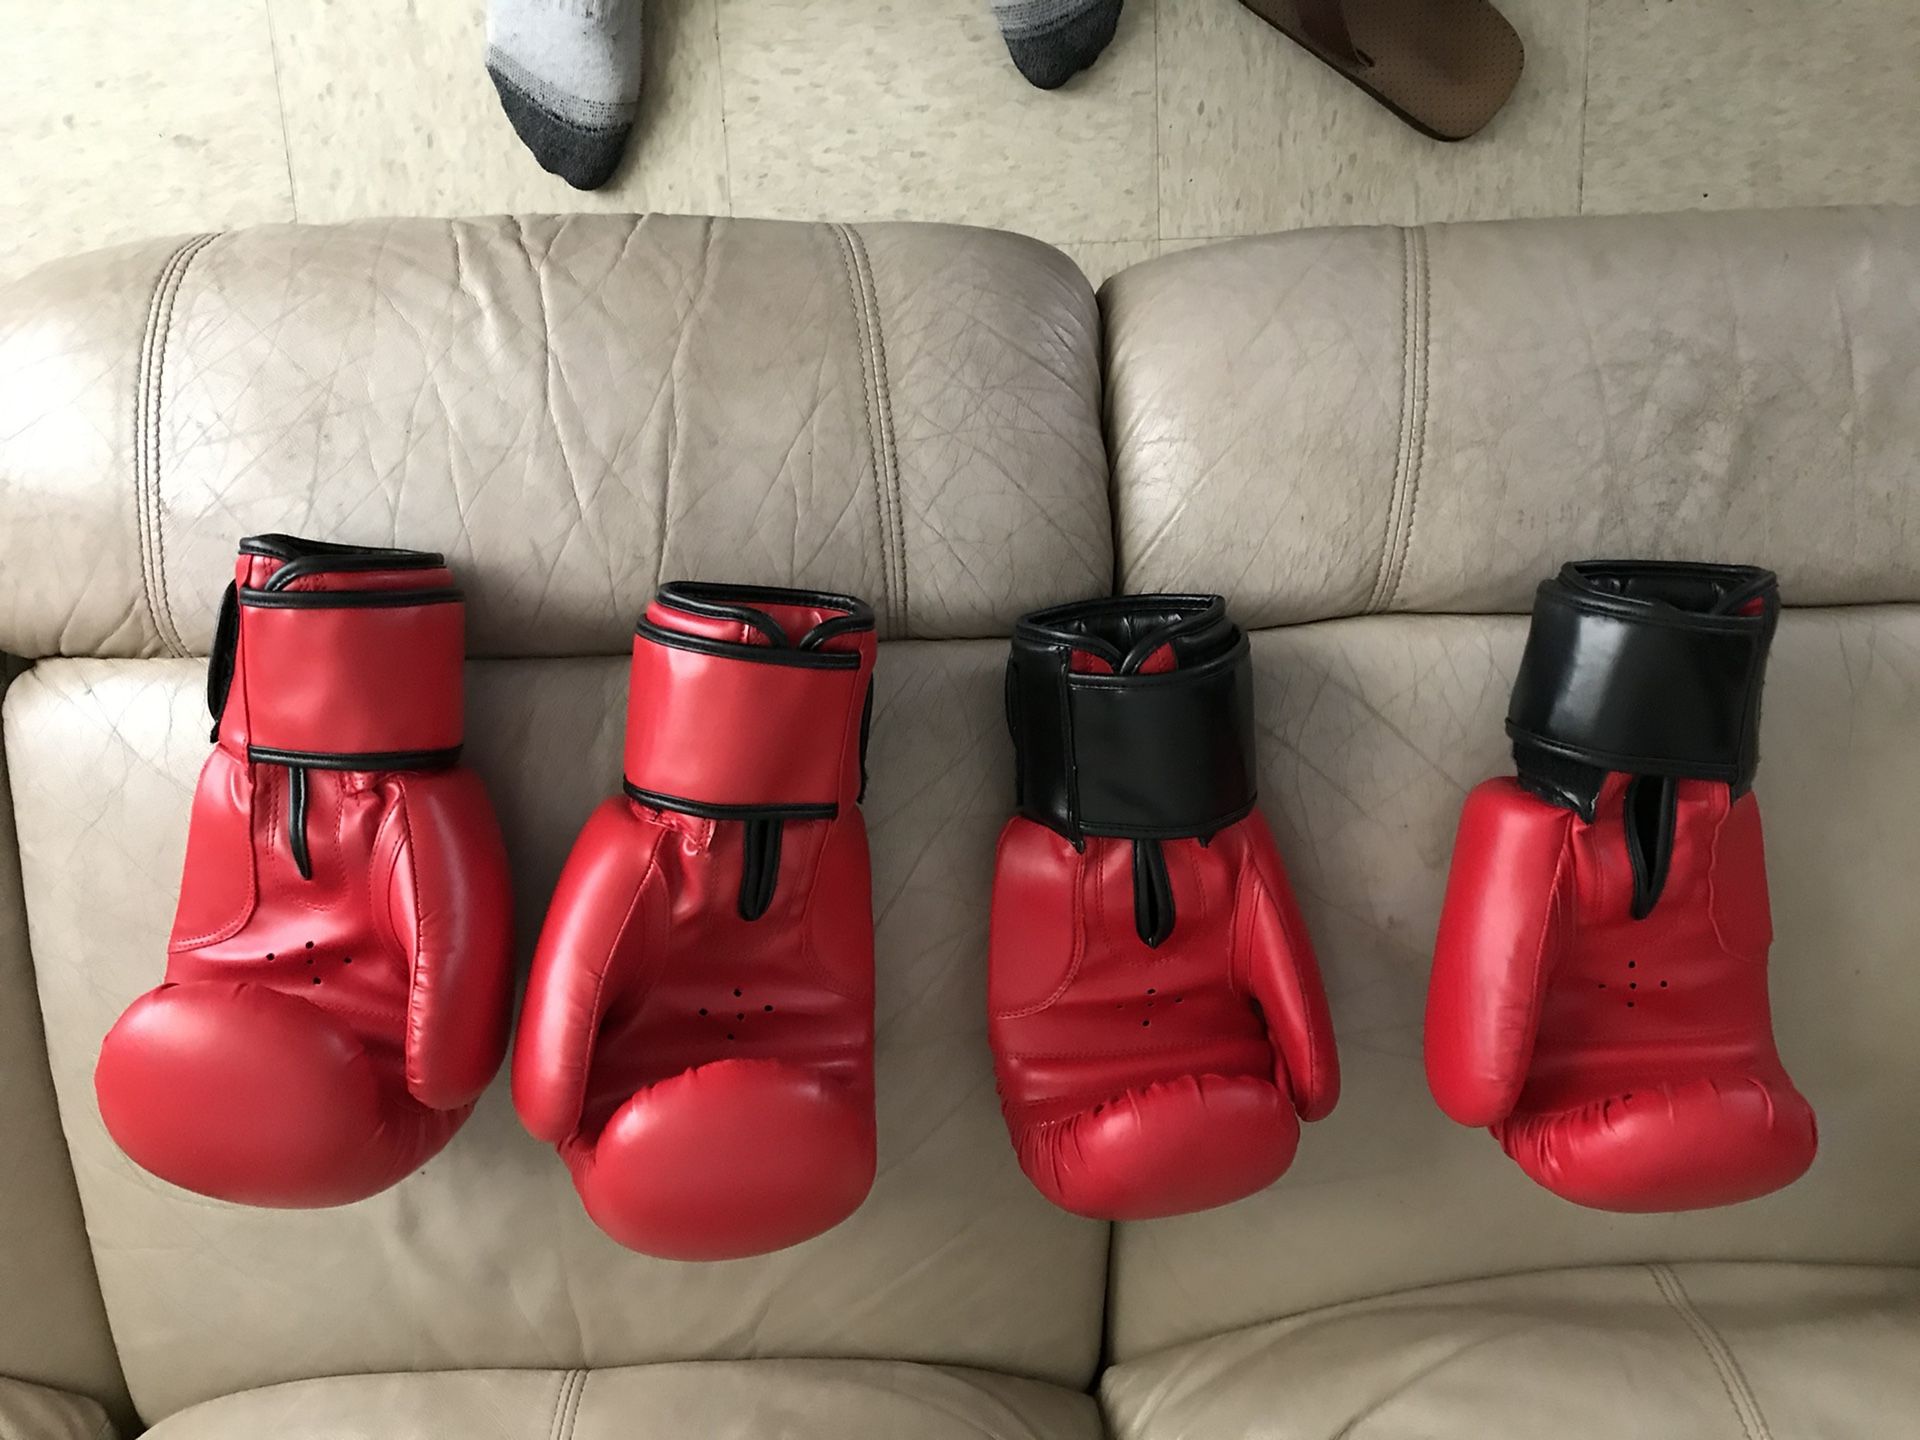 Punching bag with 4 12oz gloves.